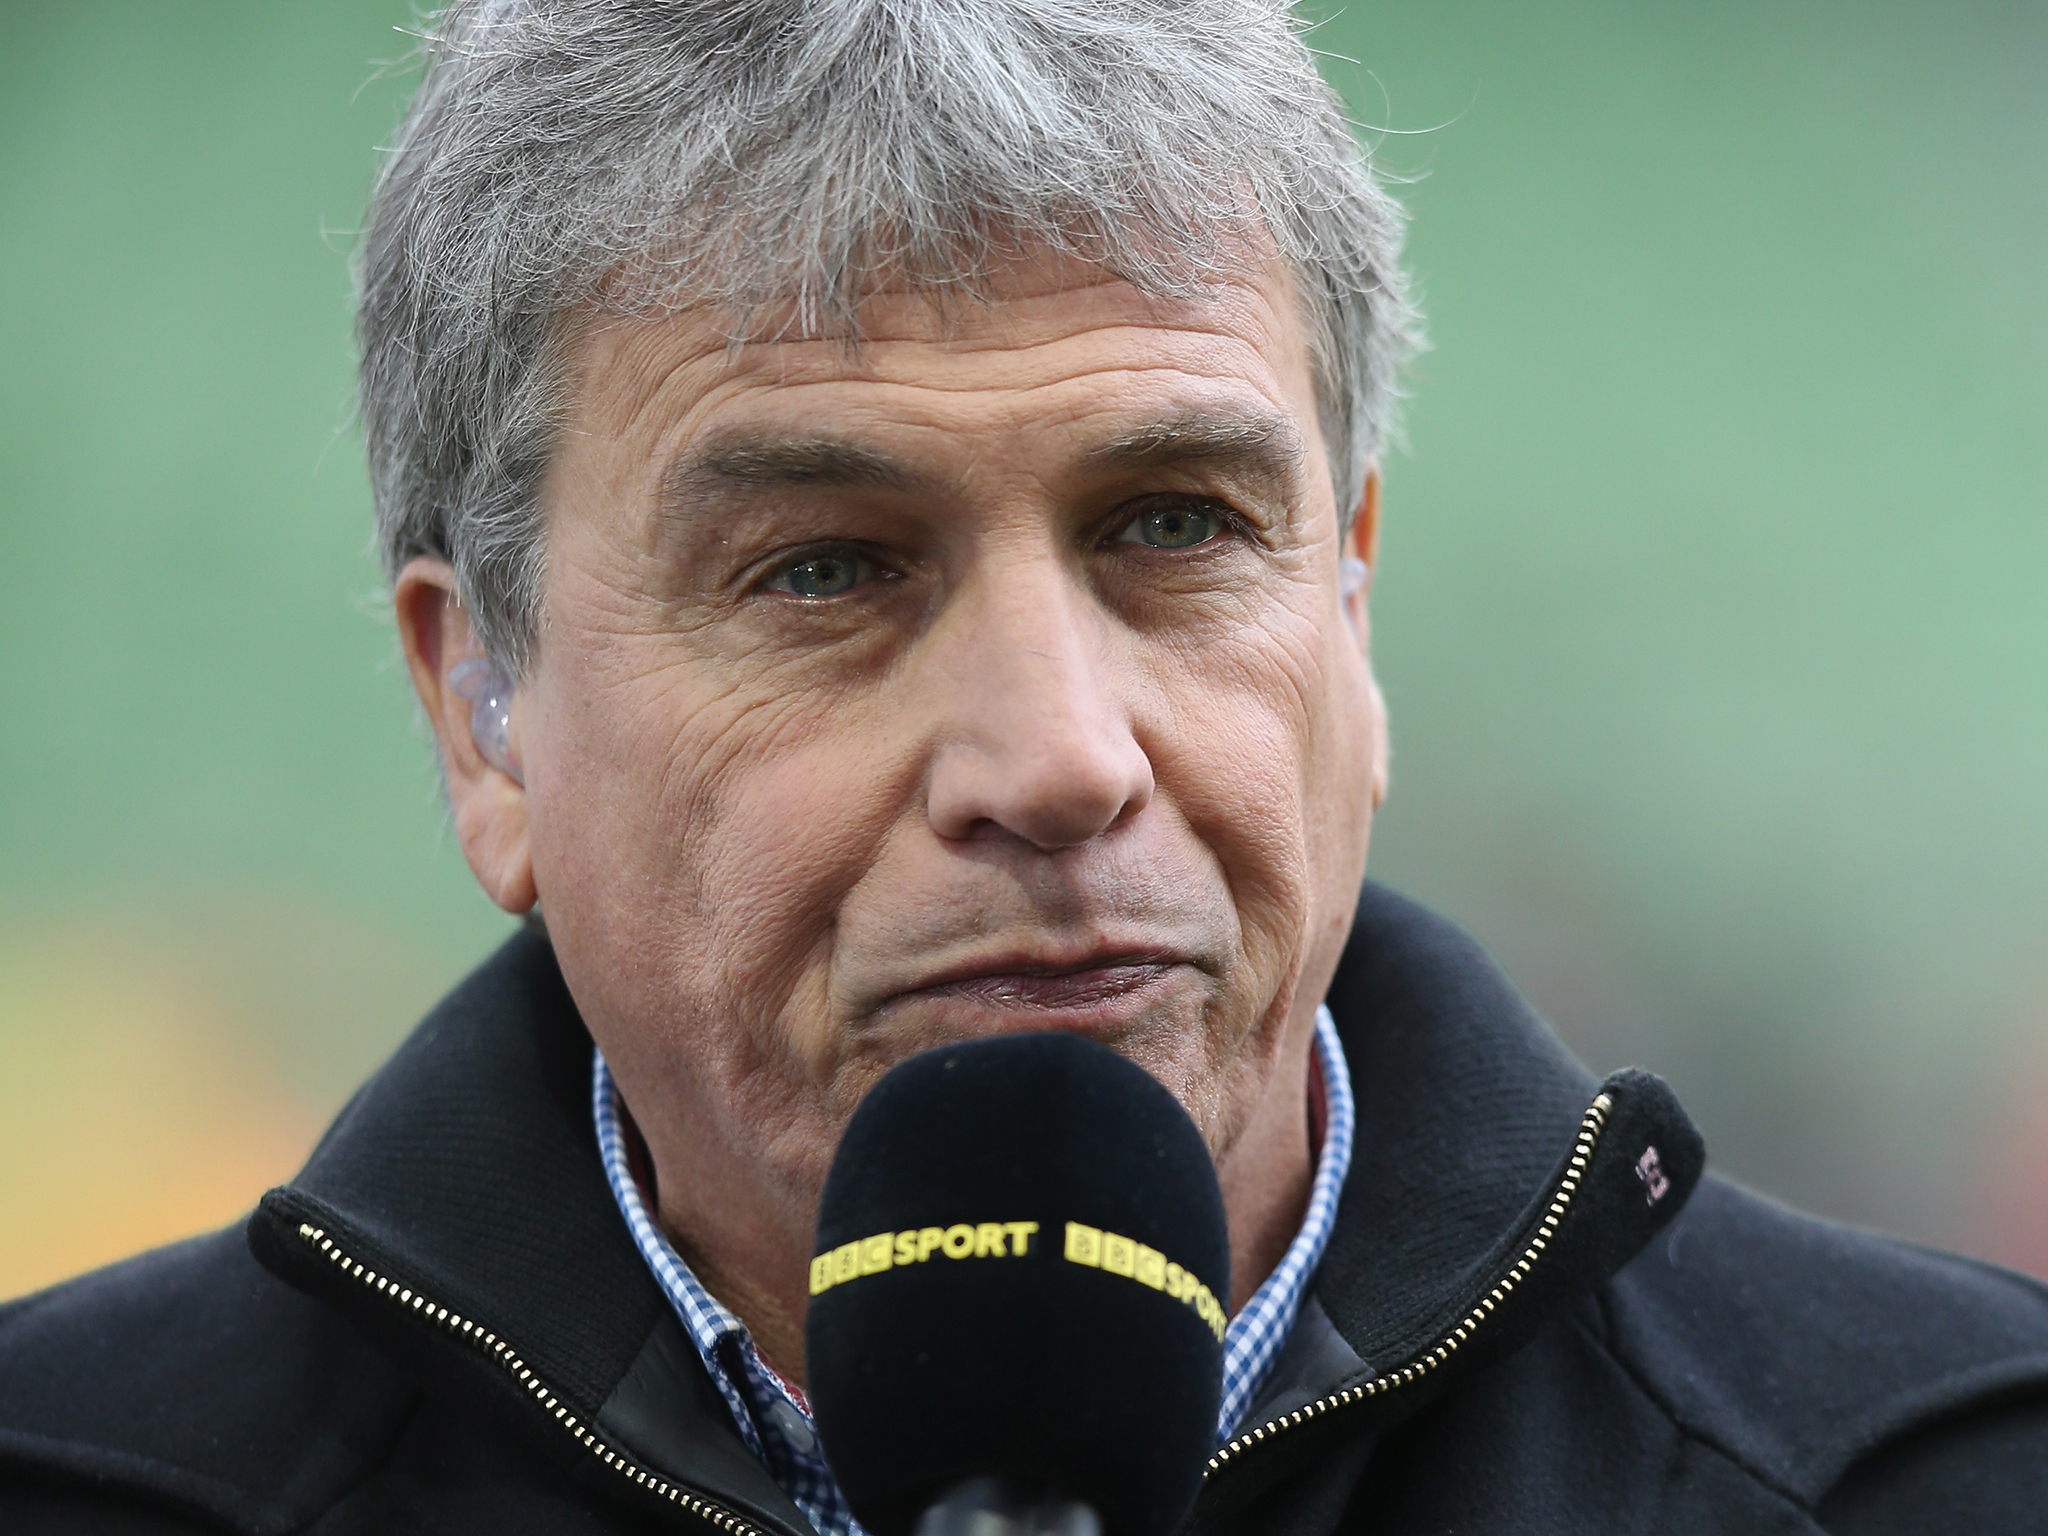 John Inverdale Photos and Wallpapers